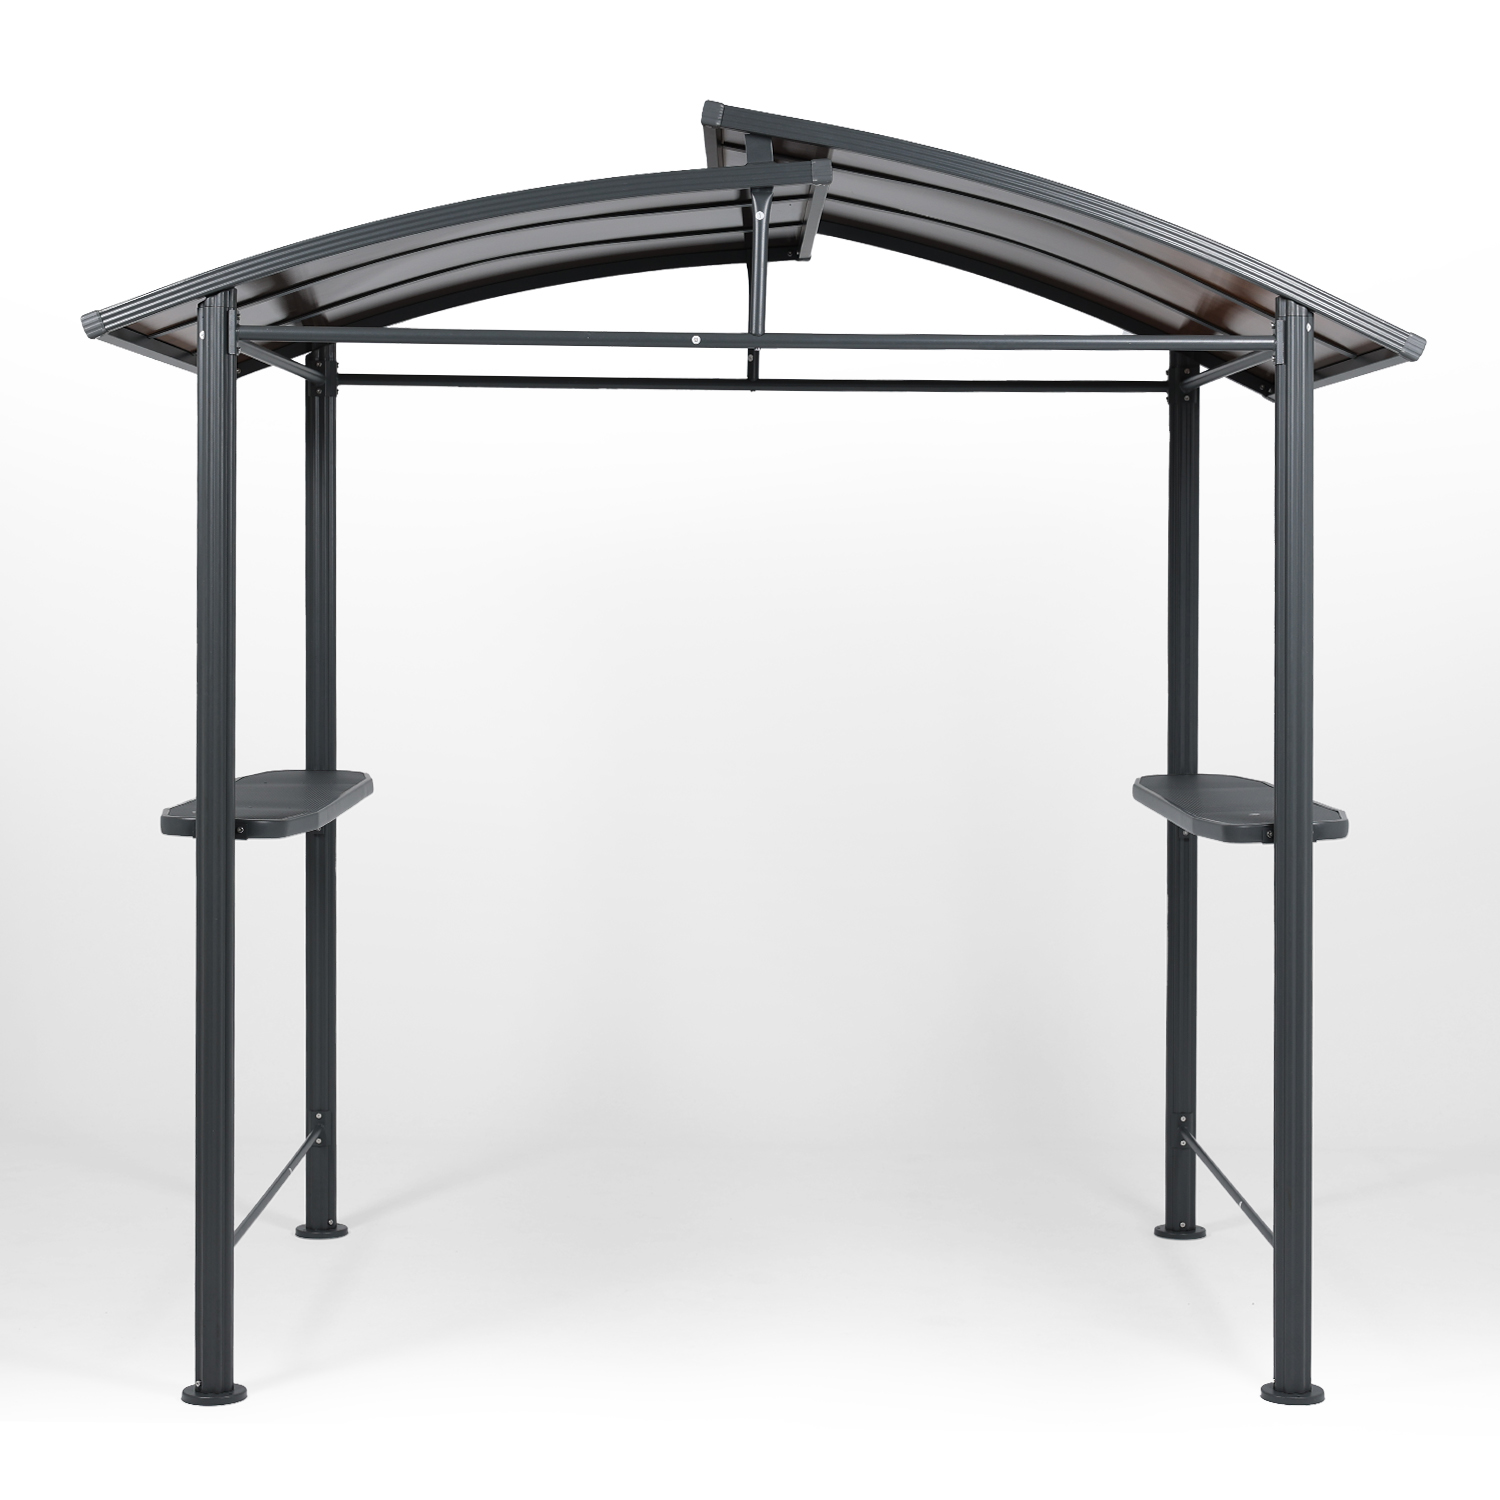 Aoodor 8 x 5 ft. BBQ Grill Gazebo Shelter, Gray Steel Frame with Side Shelves,  for Outdoor, Patio, Backyard - image 2 of 7